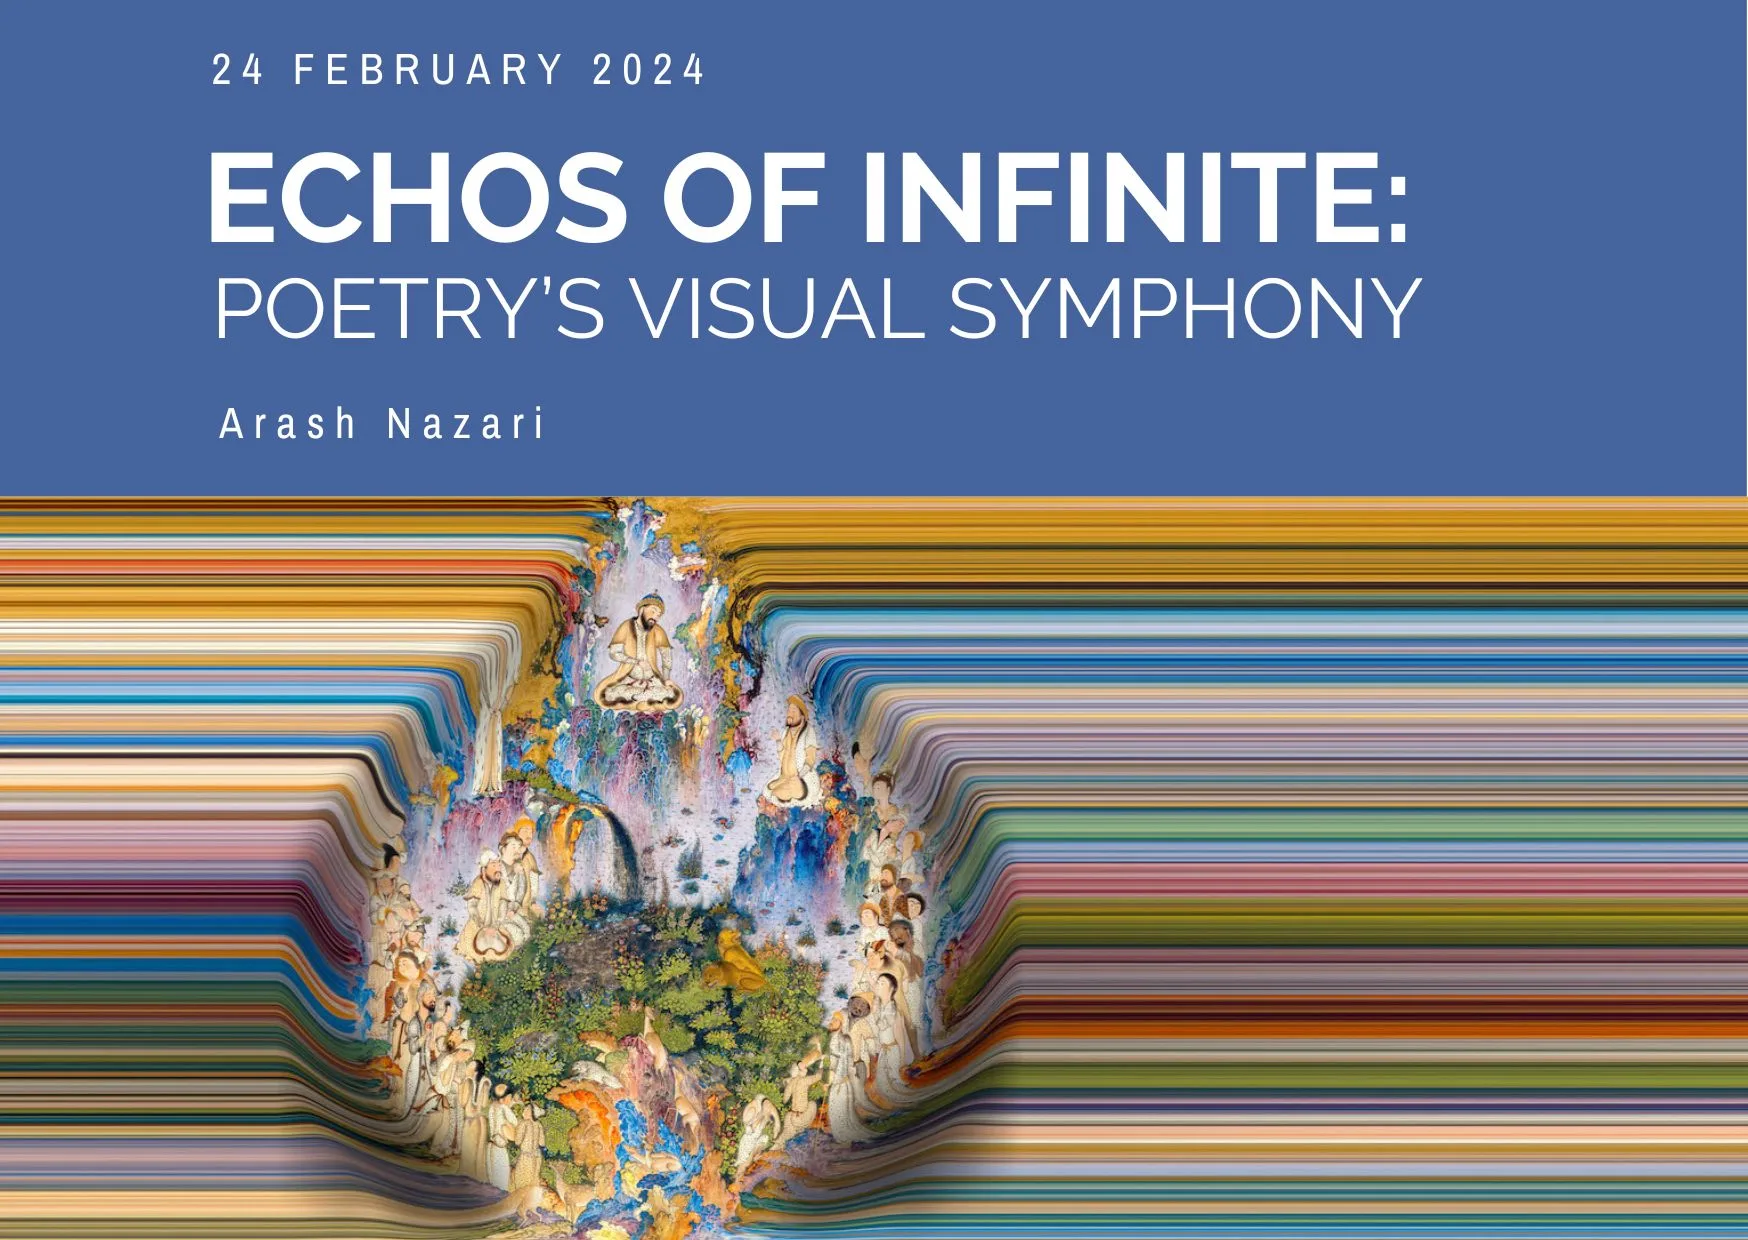 Upcoming exhibition | Echoes of Infinite: Poetry’s Visual Symphony